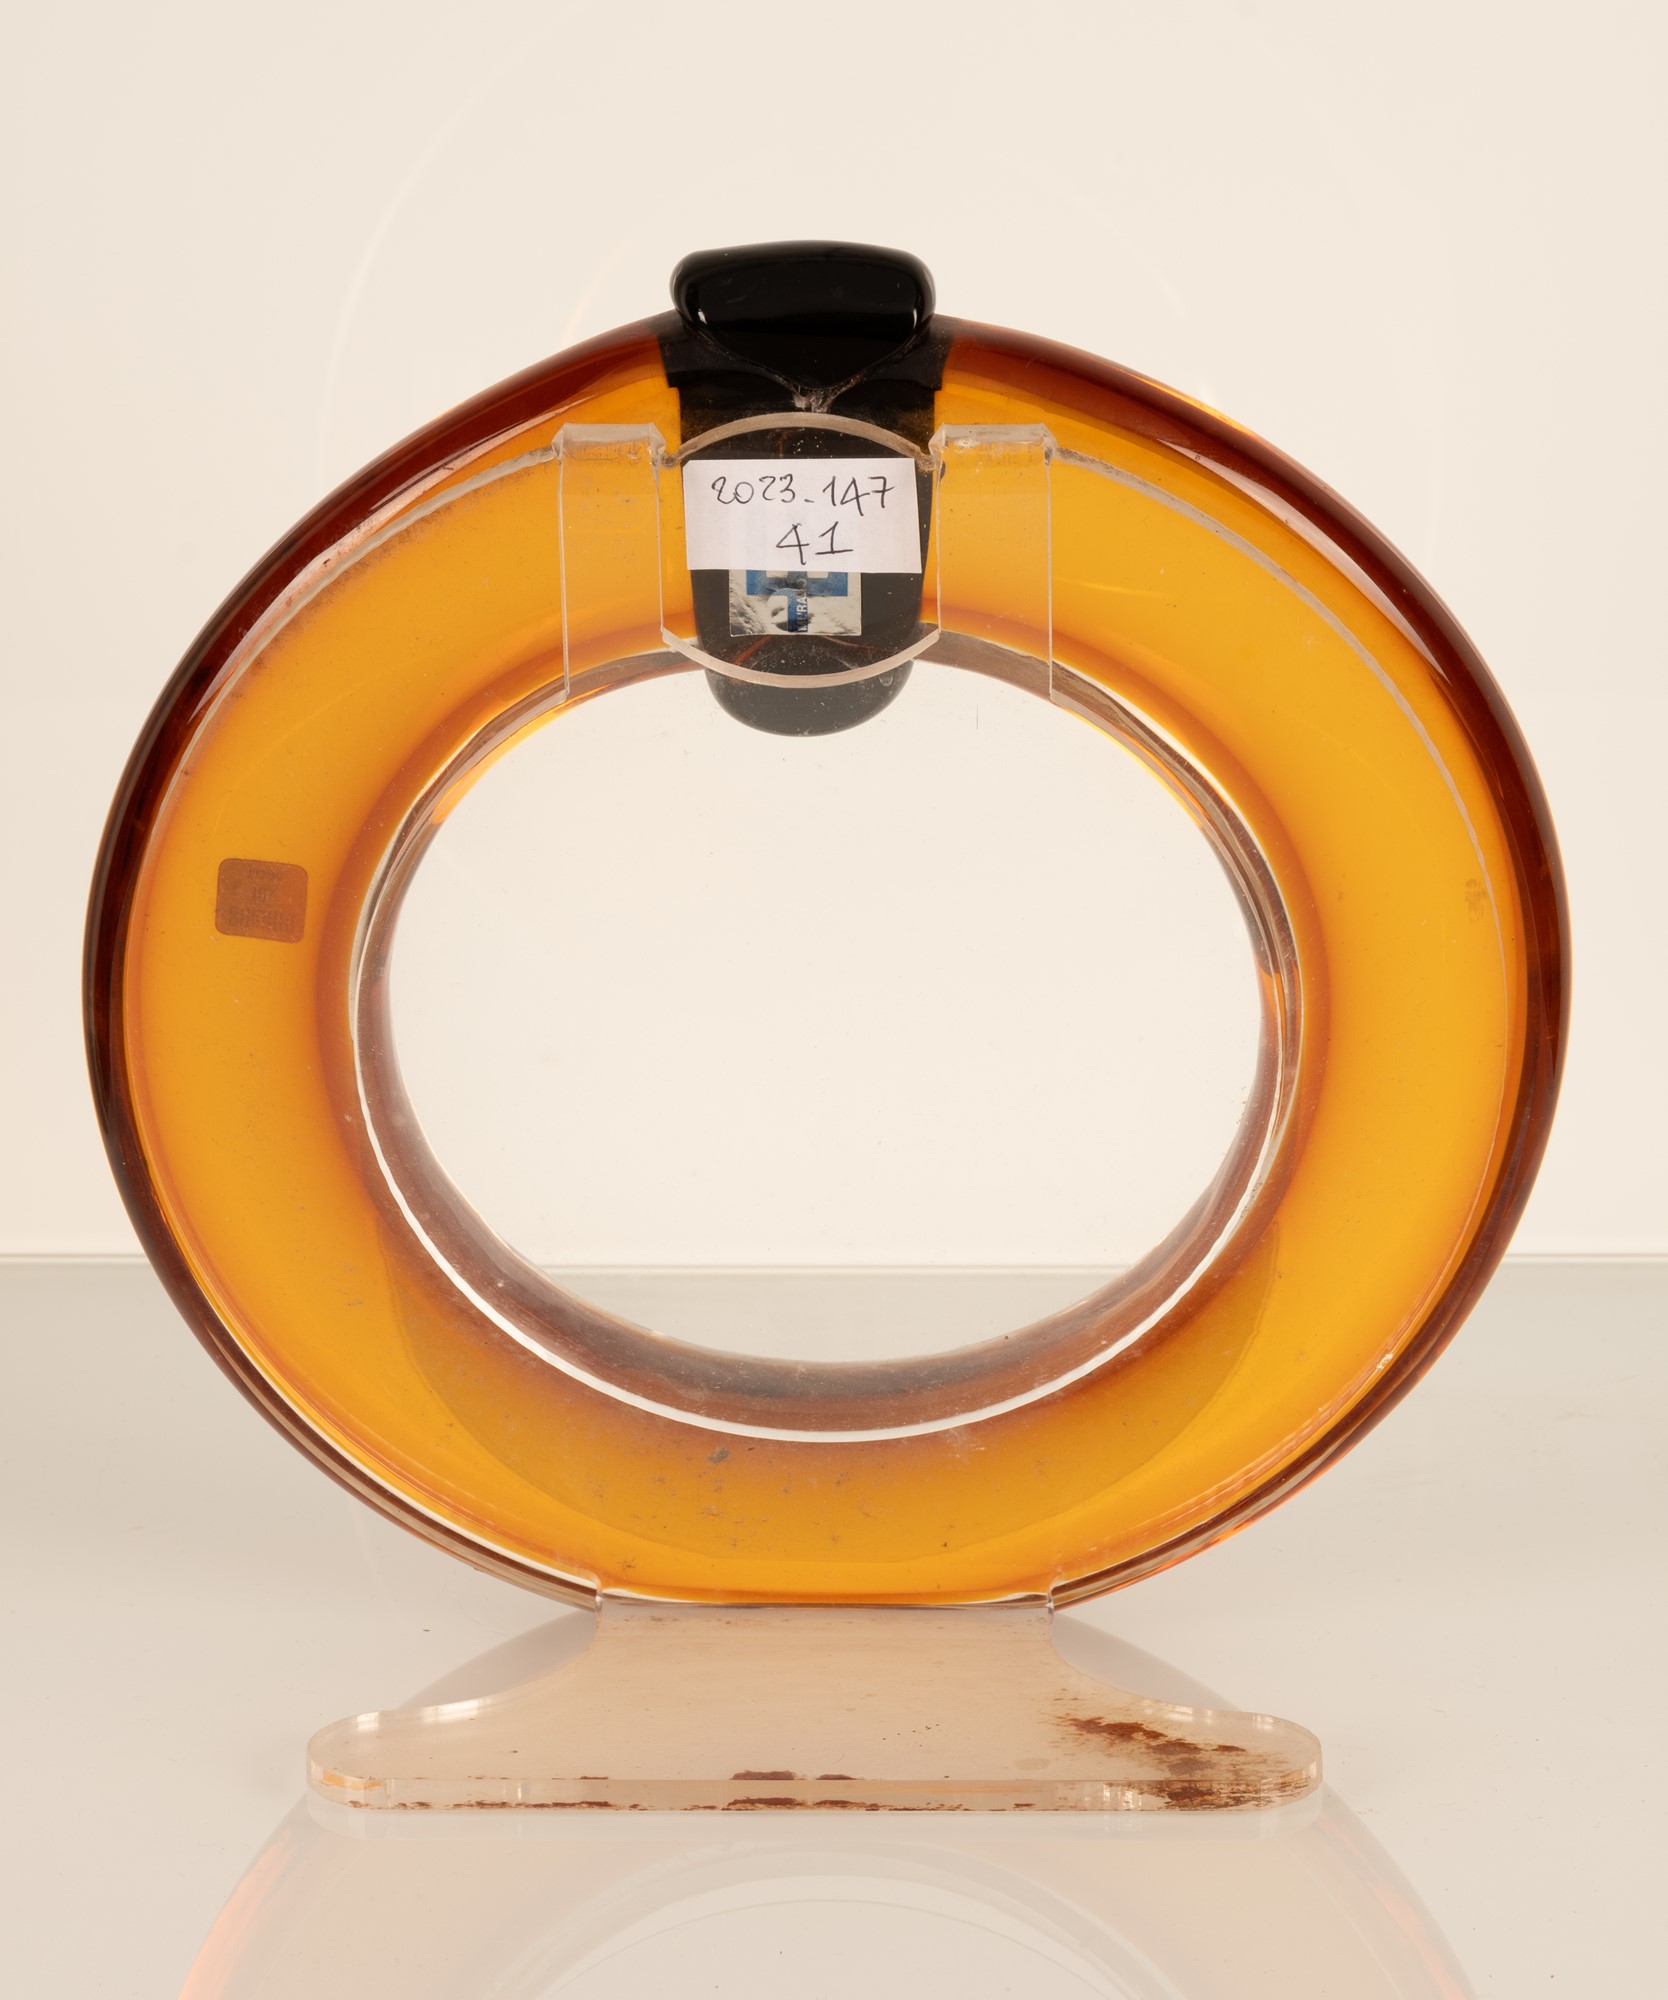 Vintage round photo frame in Murano glass in shades of Amber - Image 11 of 19